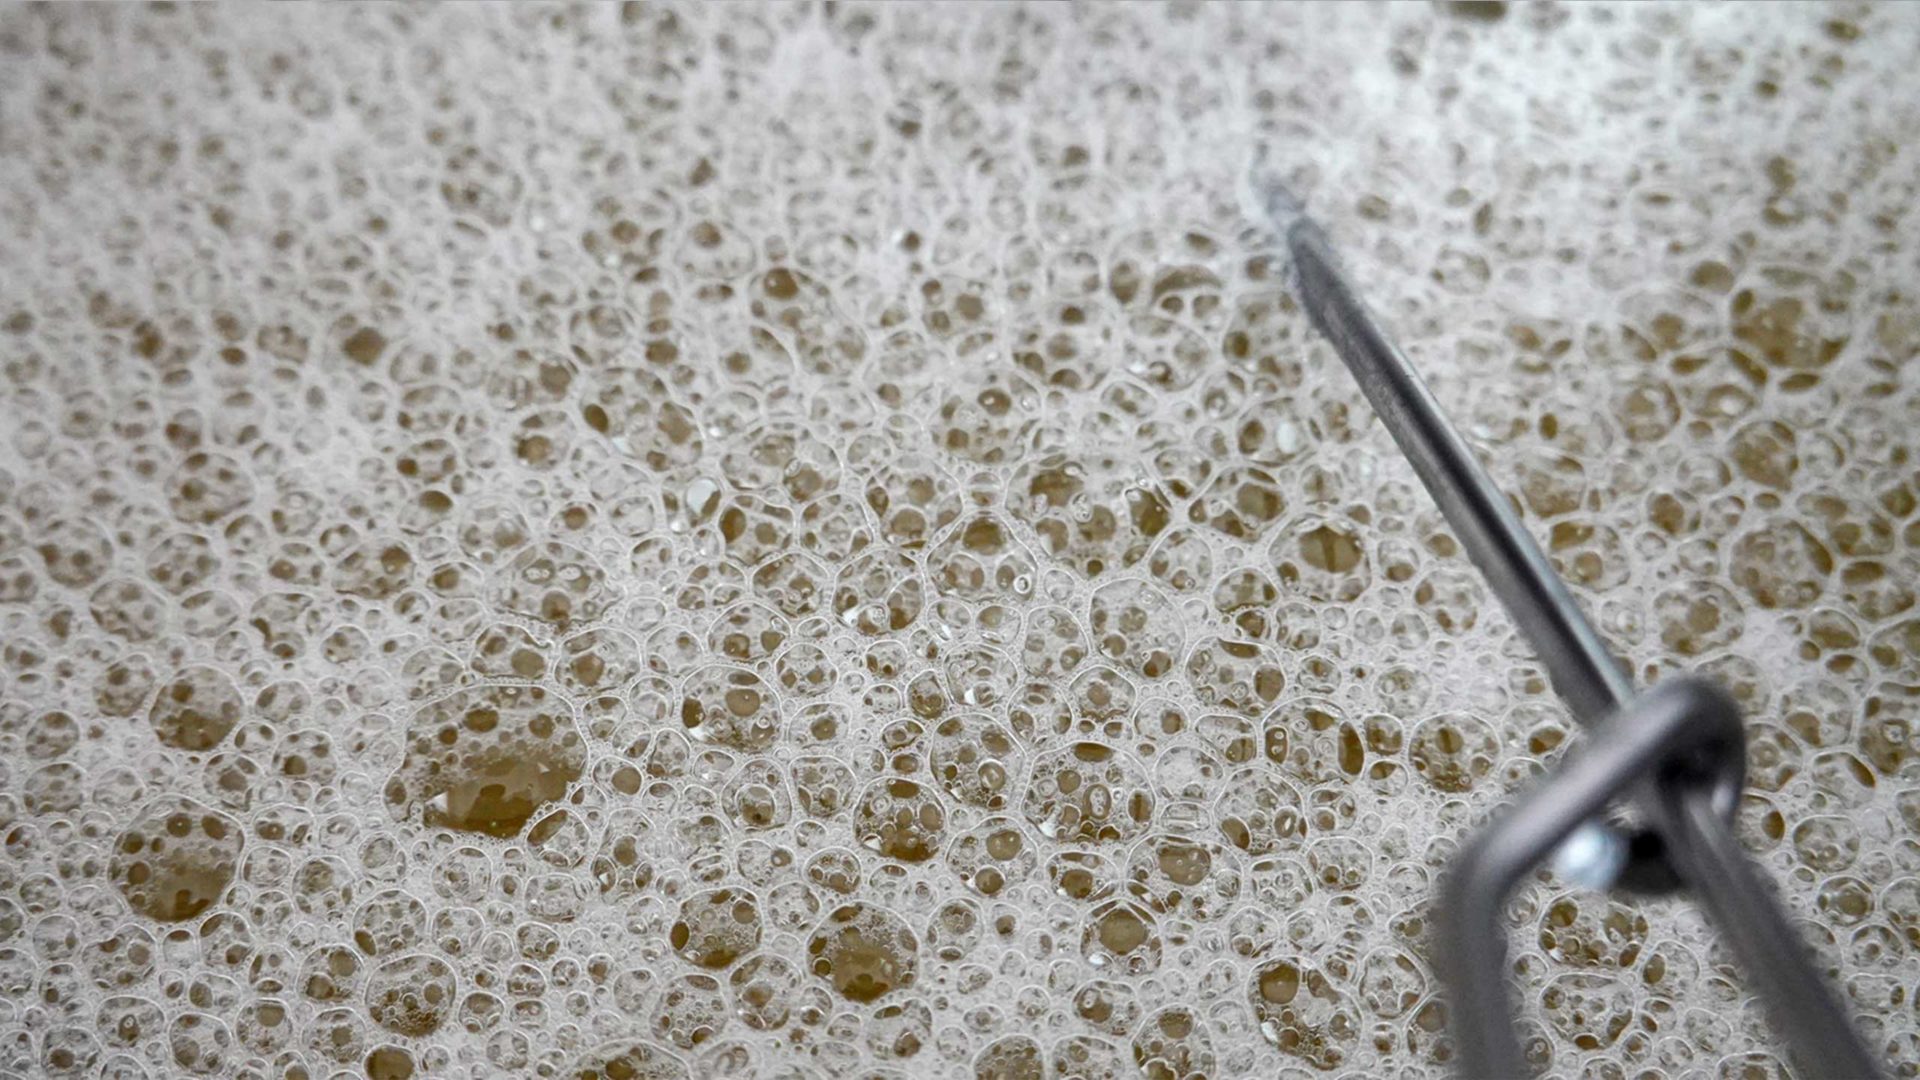 Honey wine - foam with hundreds of bubbles